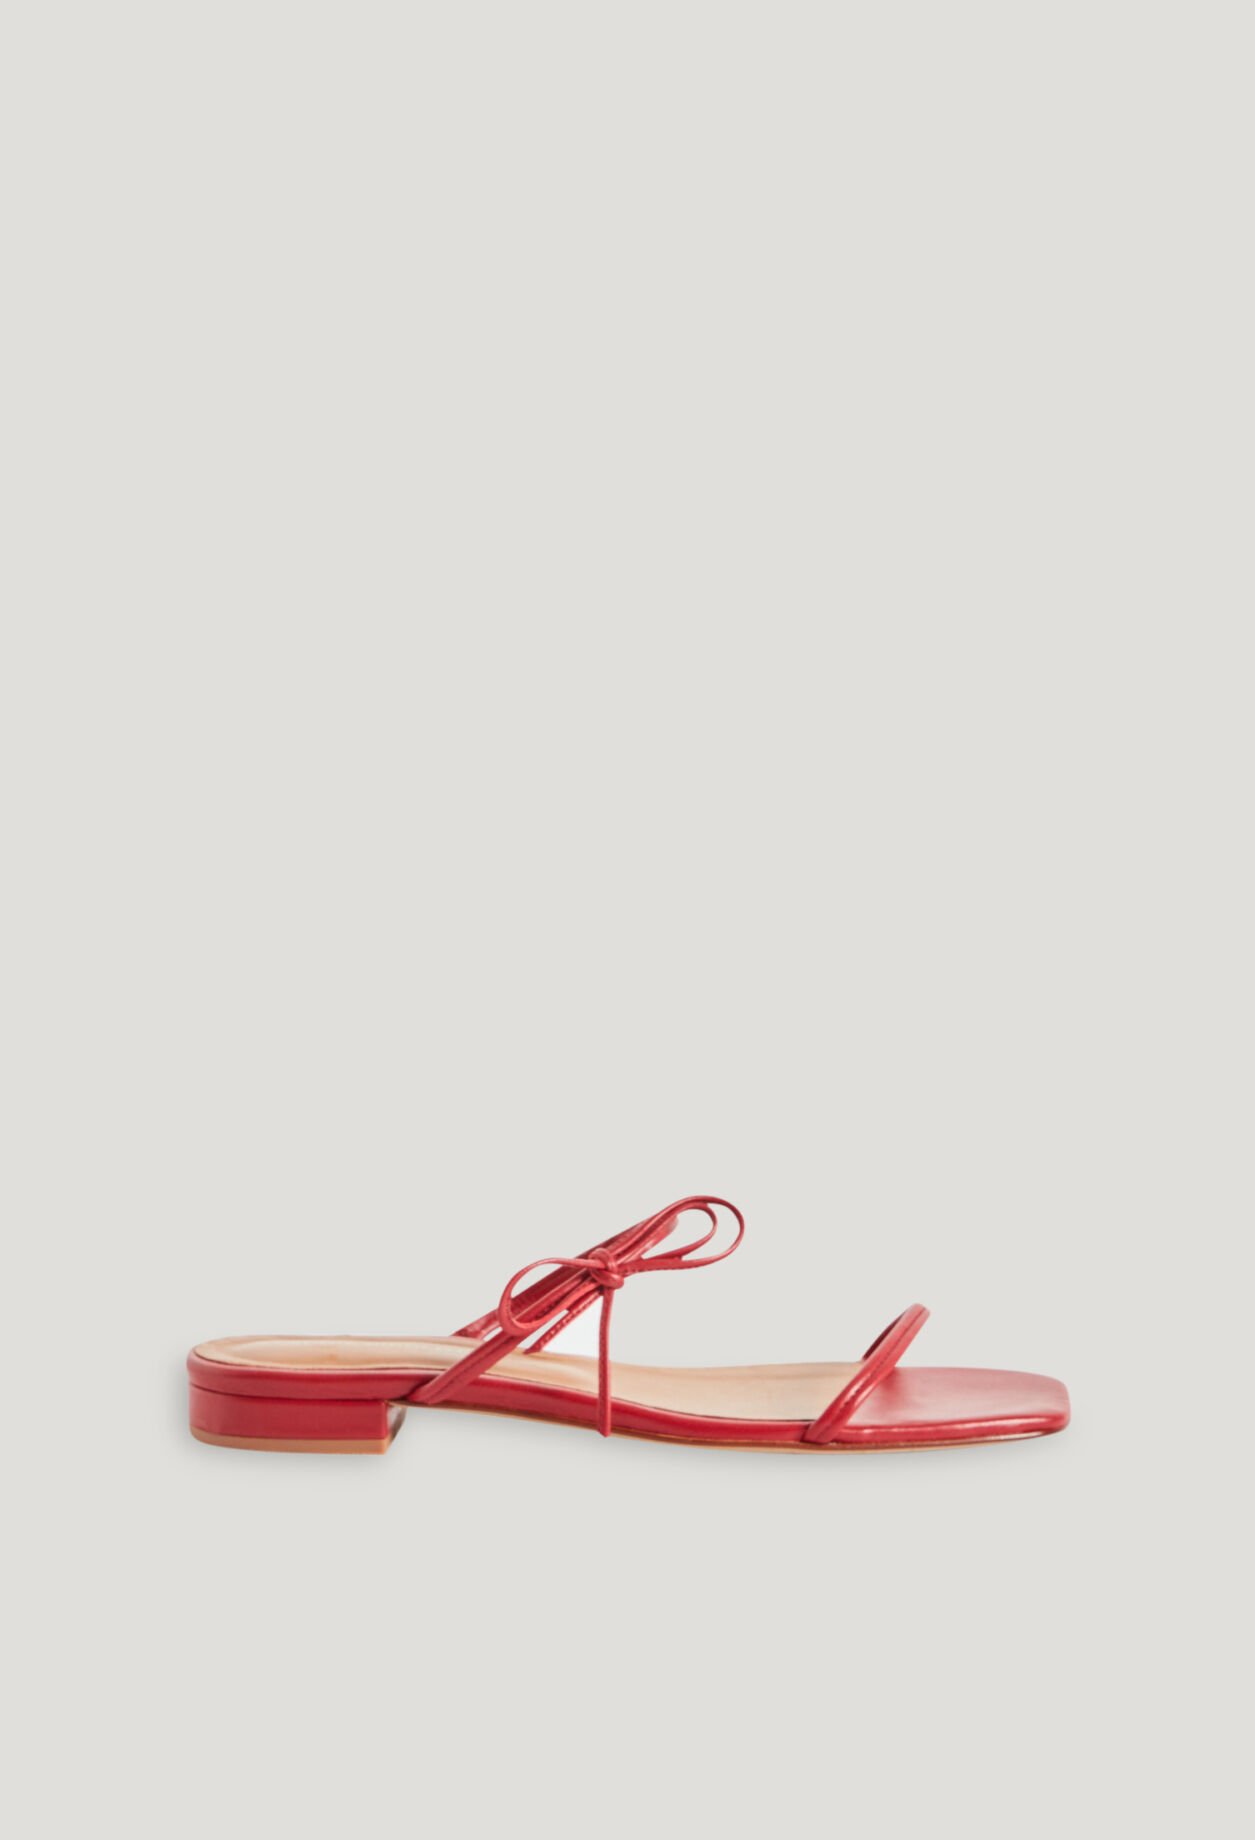 Claudie Pierlot slingback leather sandals - Red